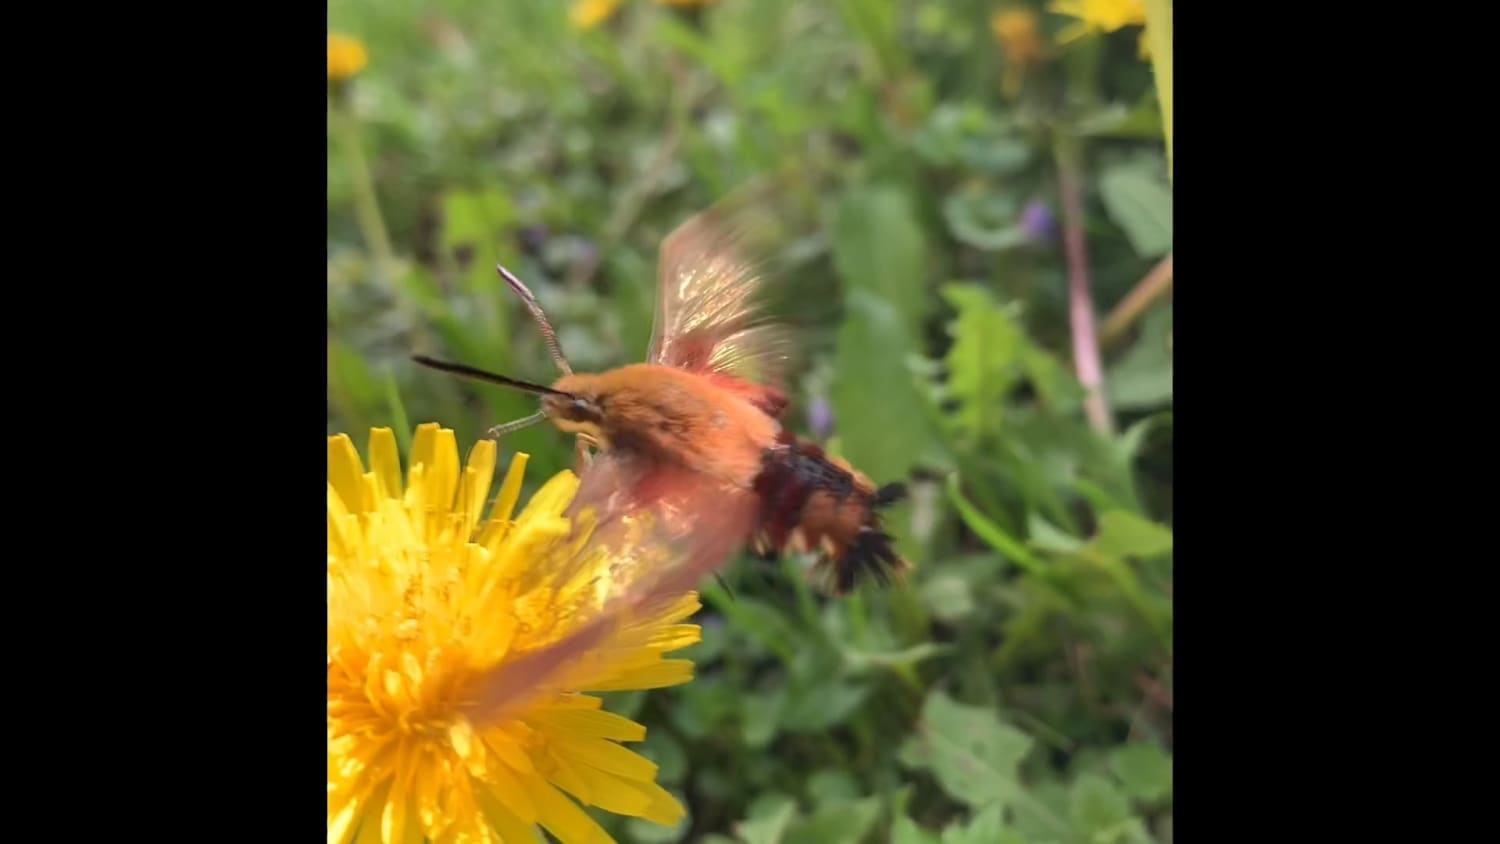 Thought I saw a baby hummingbird. Turns out it's a rare moth called a hummingbird clear wing!